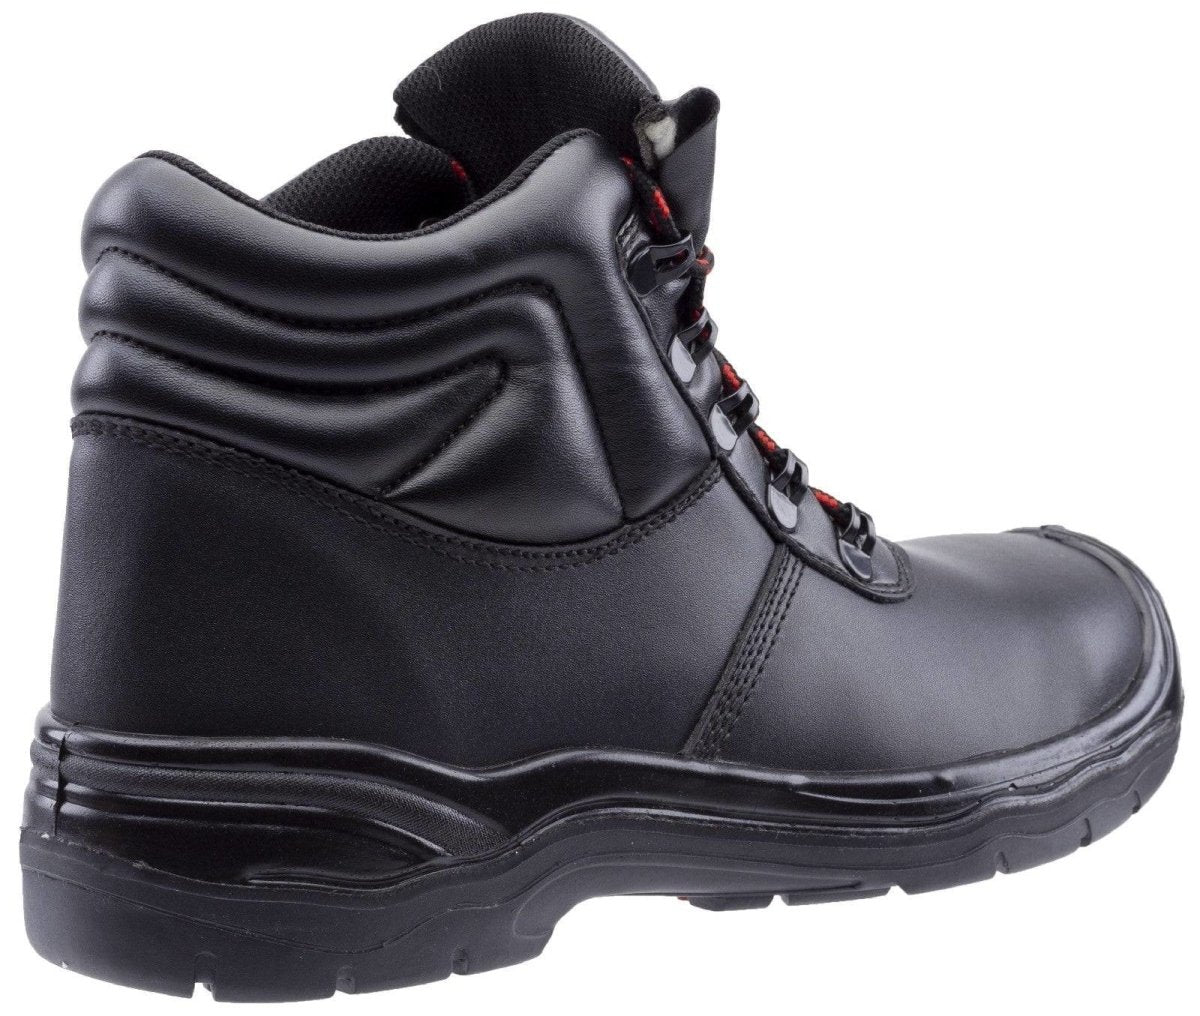 Centek Fs336 S3 Lace Up Safety Boot Boots Safety - Shoe Store Direct